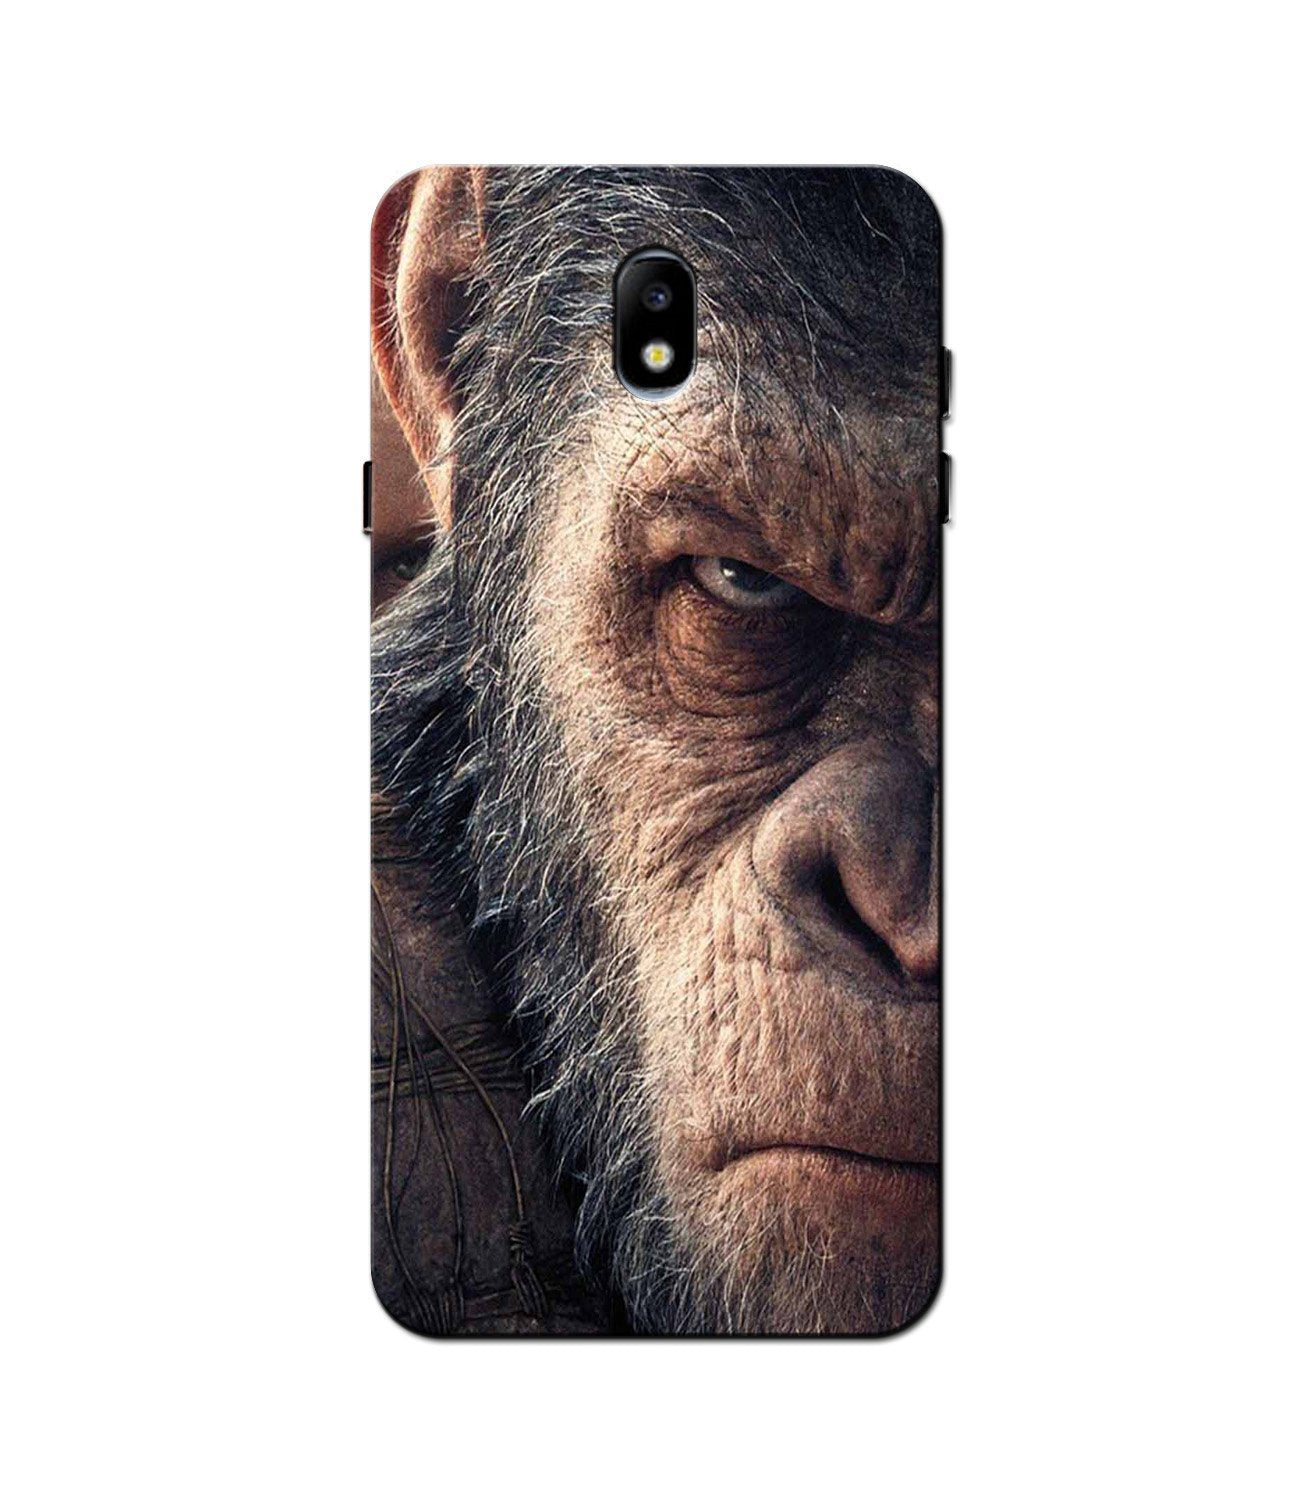 Angry Ape Mobile Back Case for Nokia 2 (Design - 316)